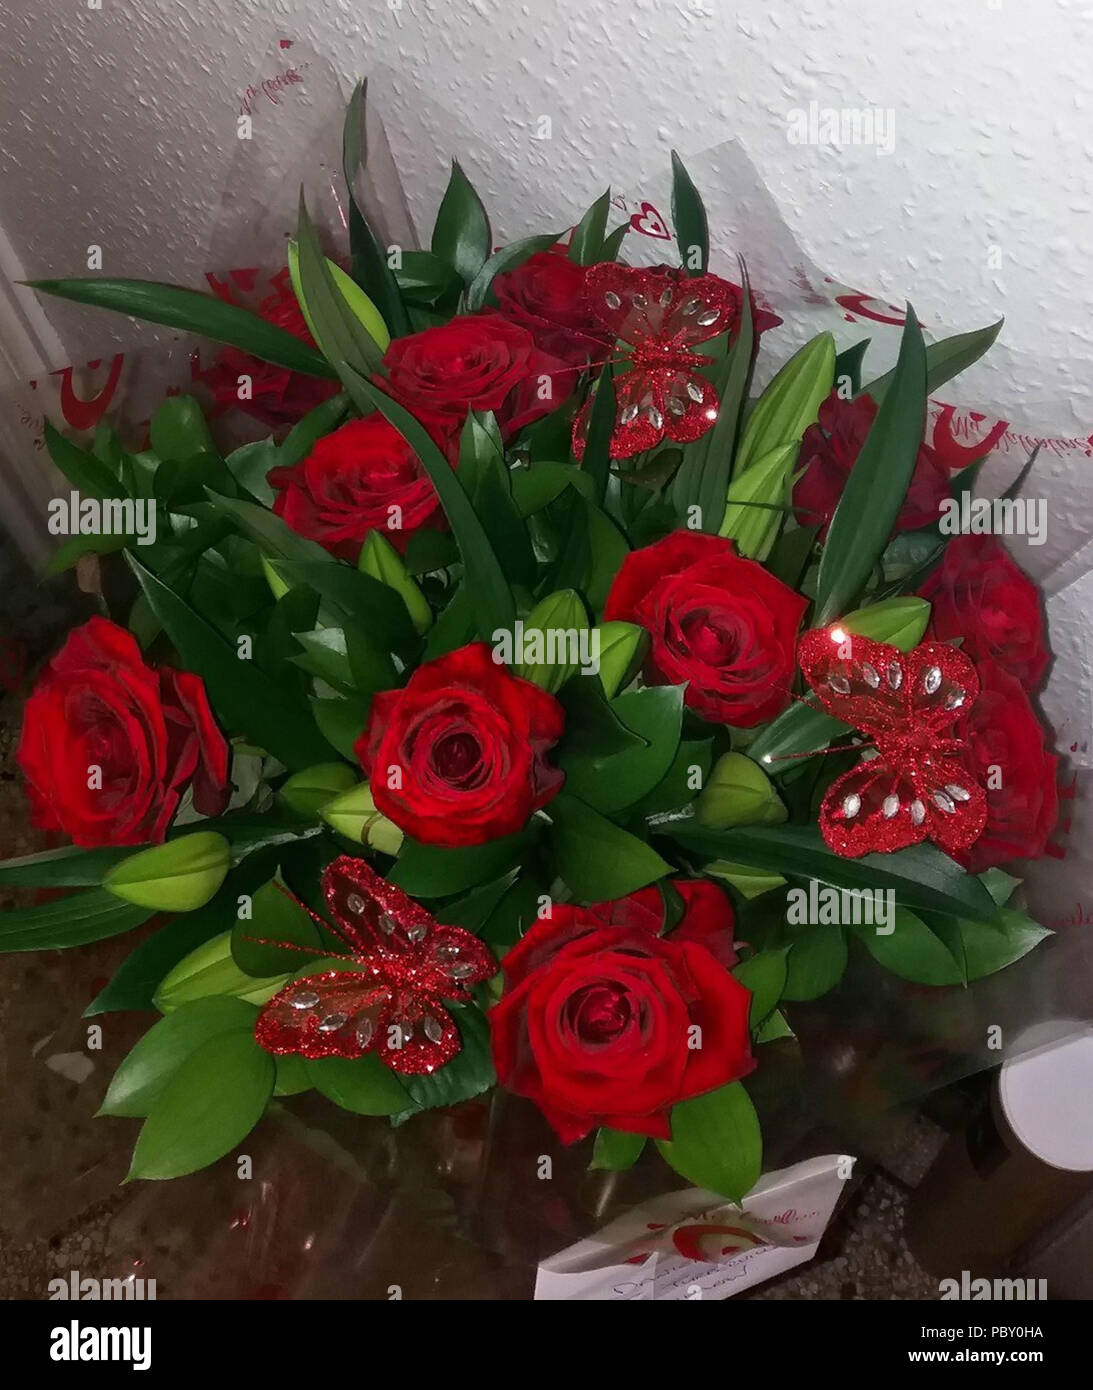 Bunch of red Valentines roses displayed against a wall Stock Photo